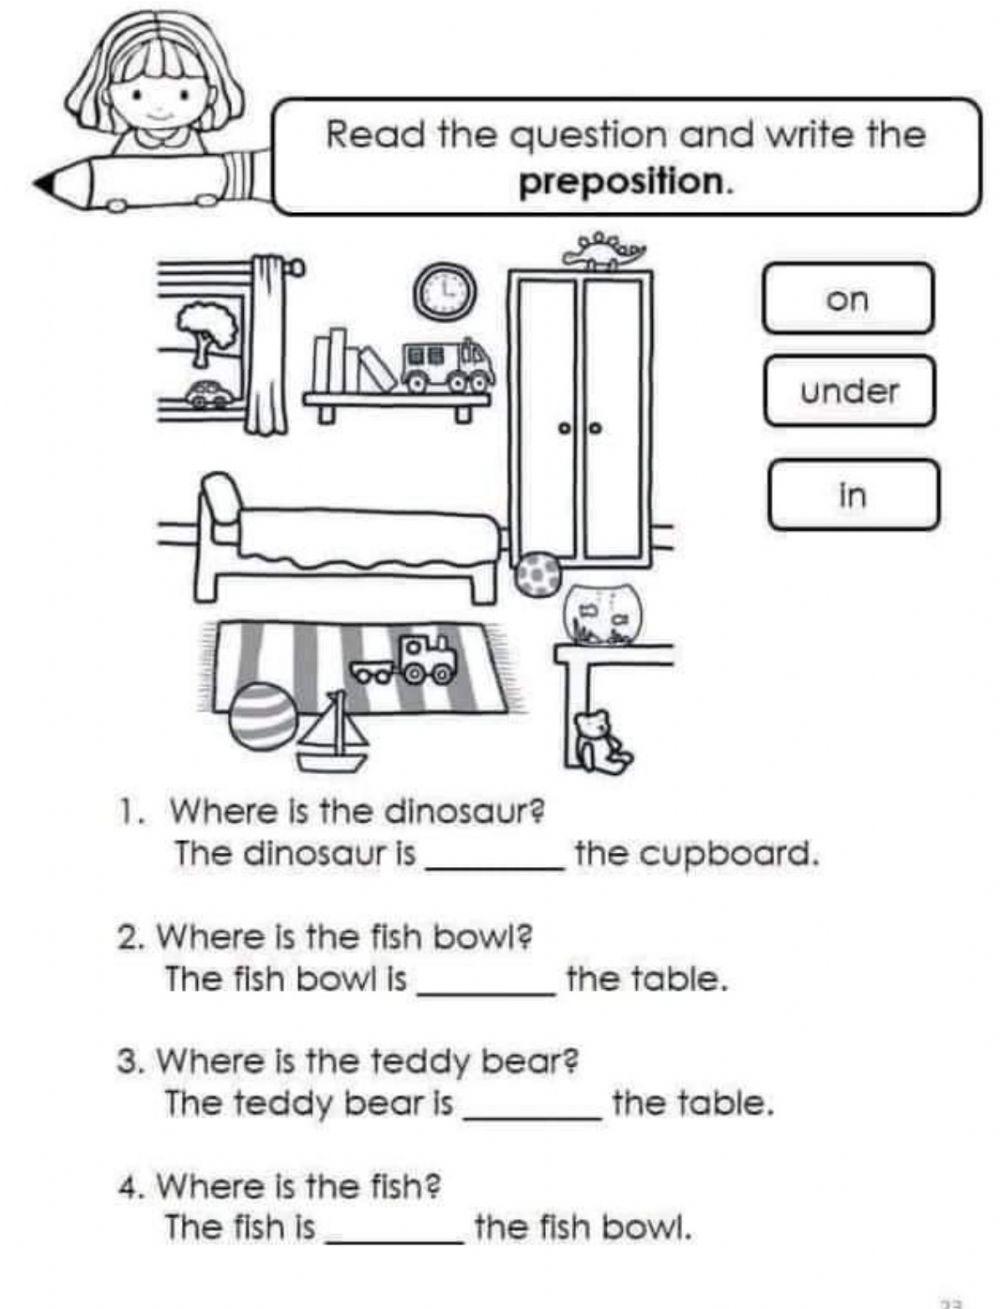 prepositions in on under